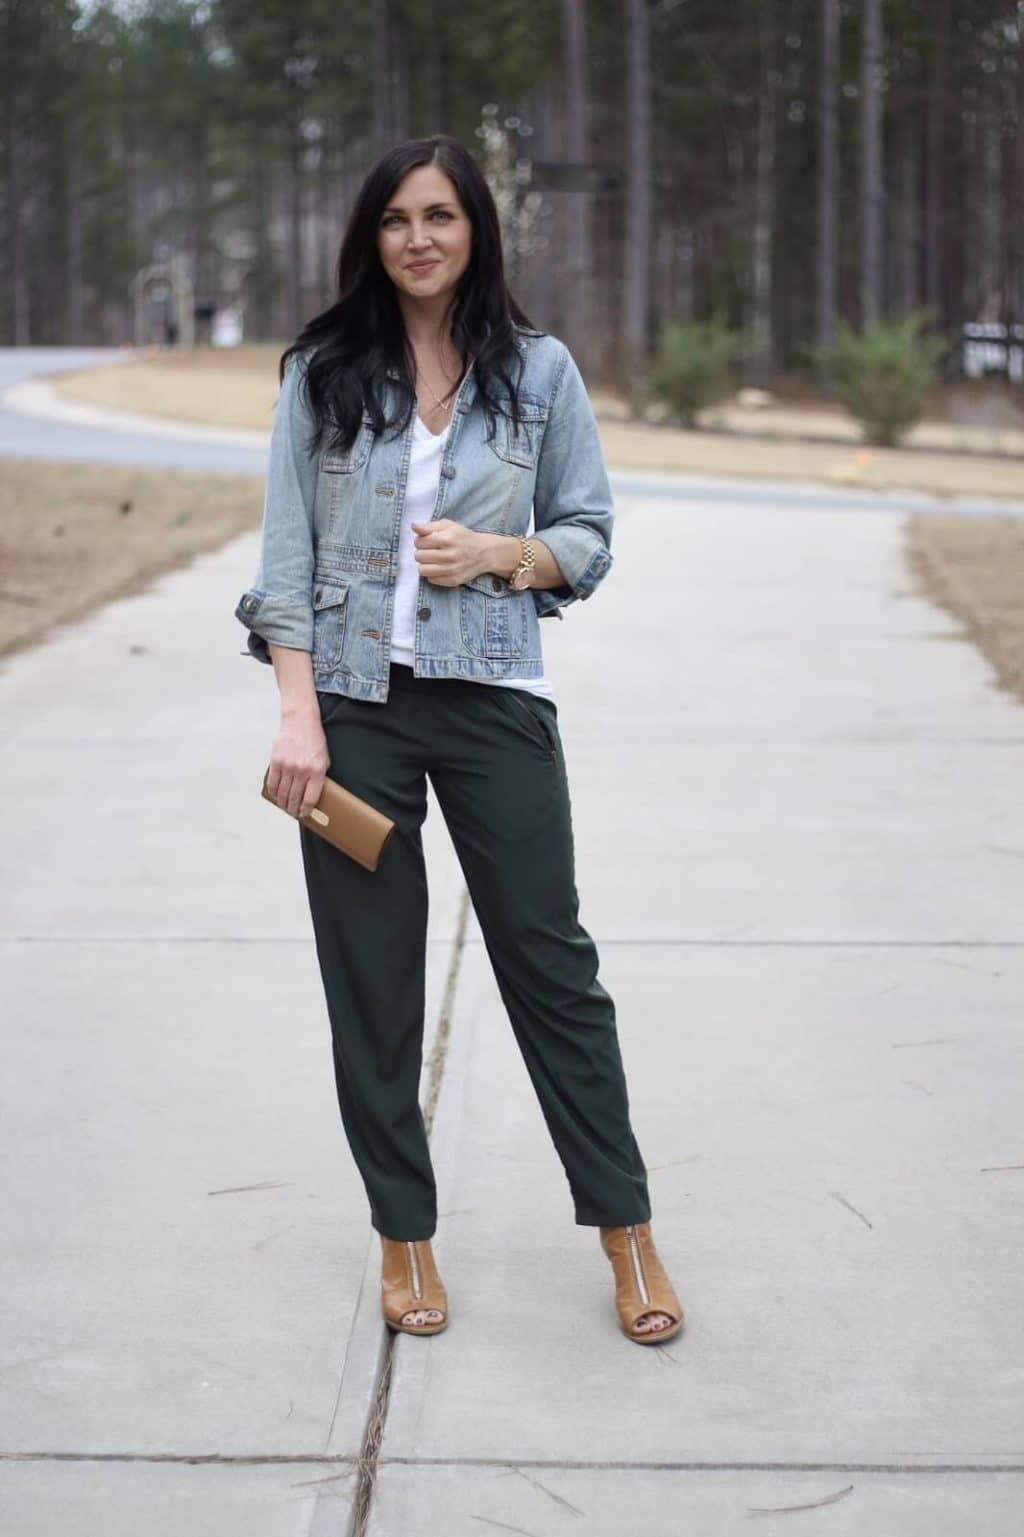 How to dress up drawstring pants via Stilettos and Diapers